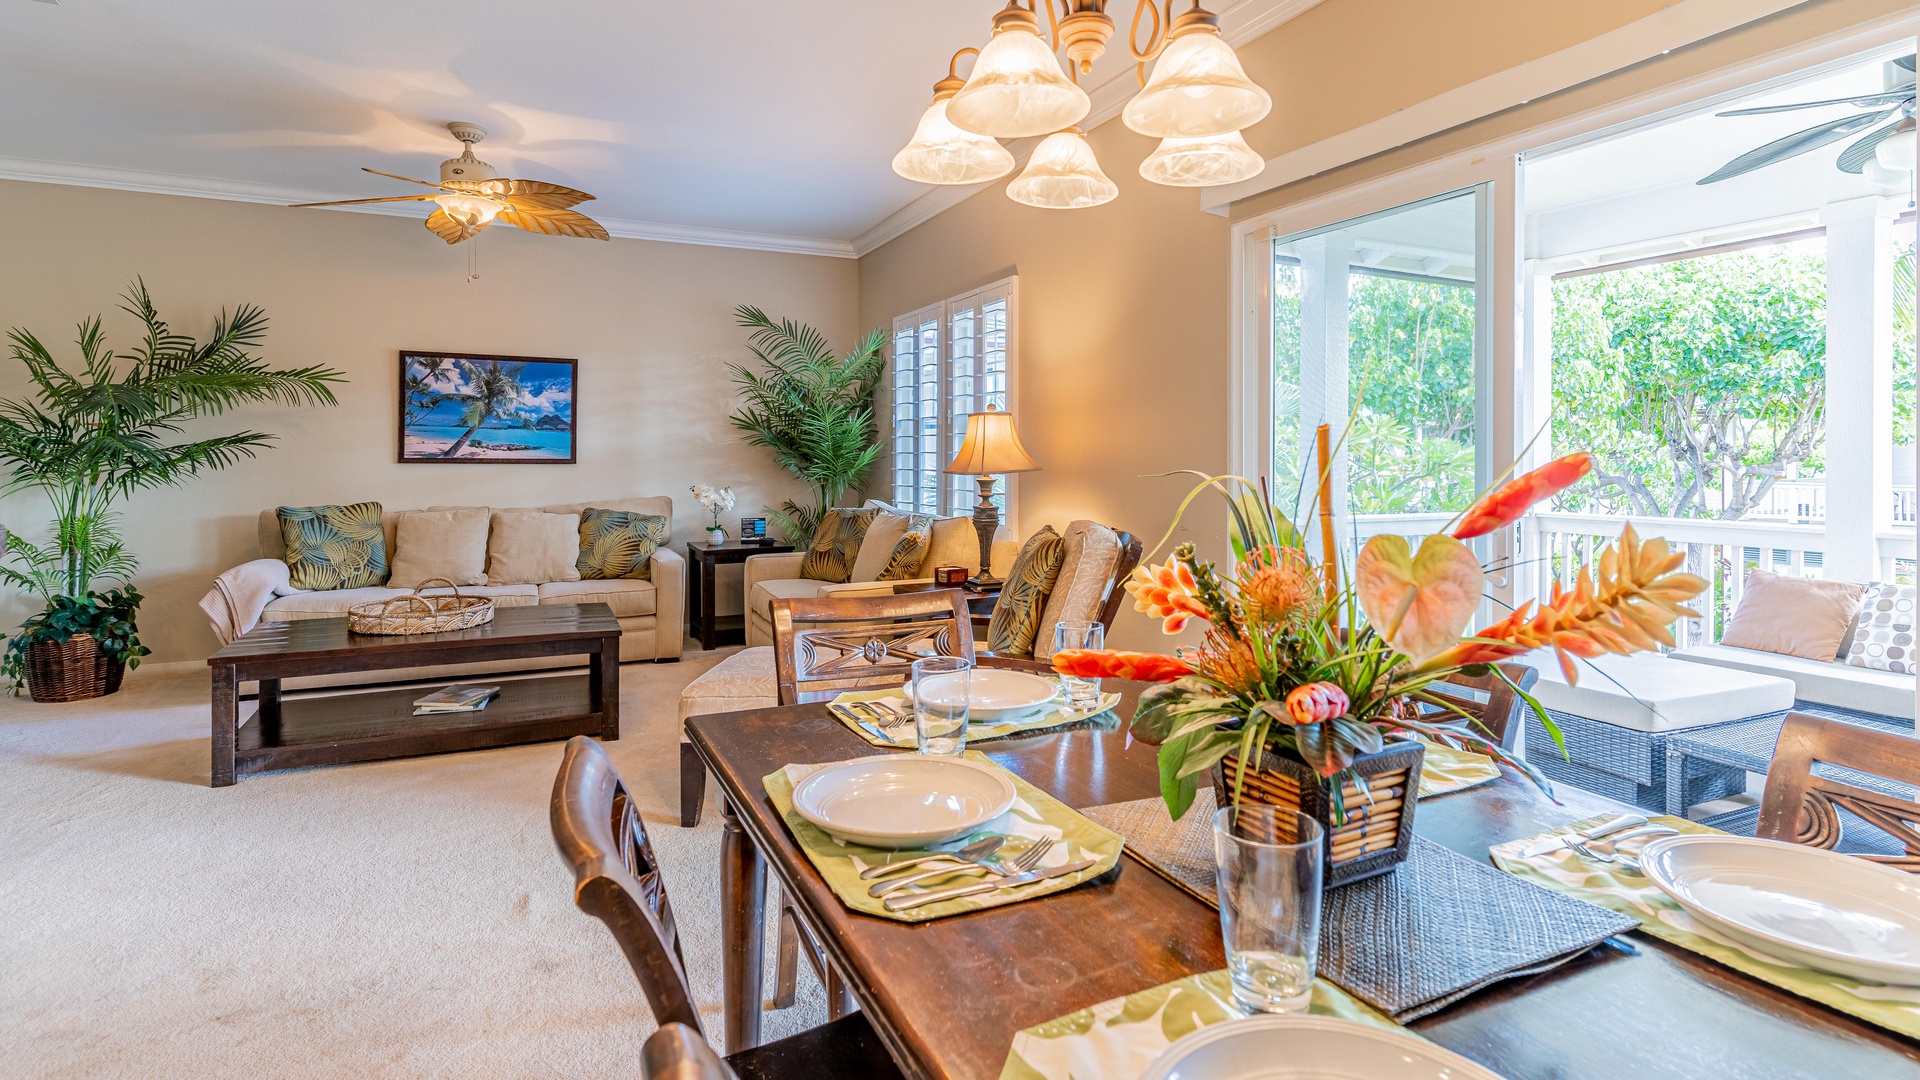 Kapolei Vacation Rentals, Coconut Plantation 1194-3 - Dine in elegance or laugh through game night at this welcoming table.